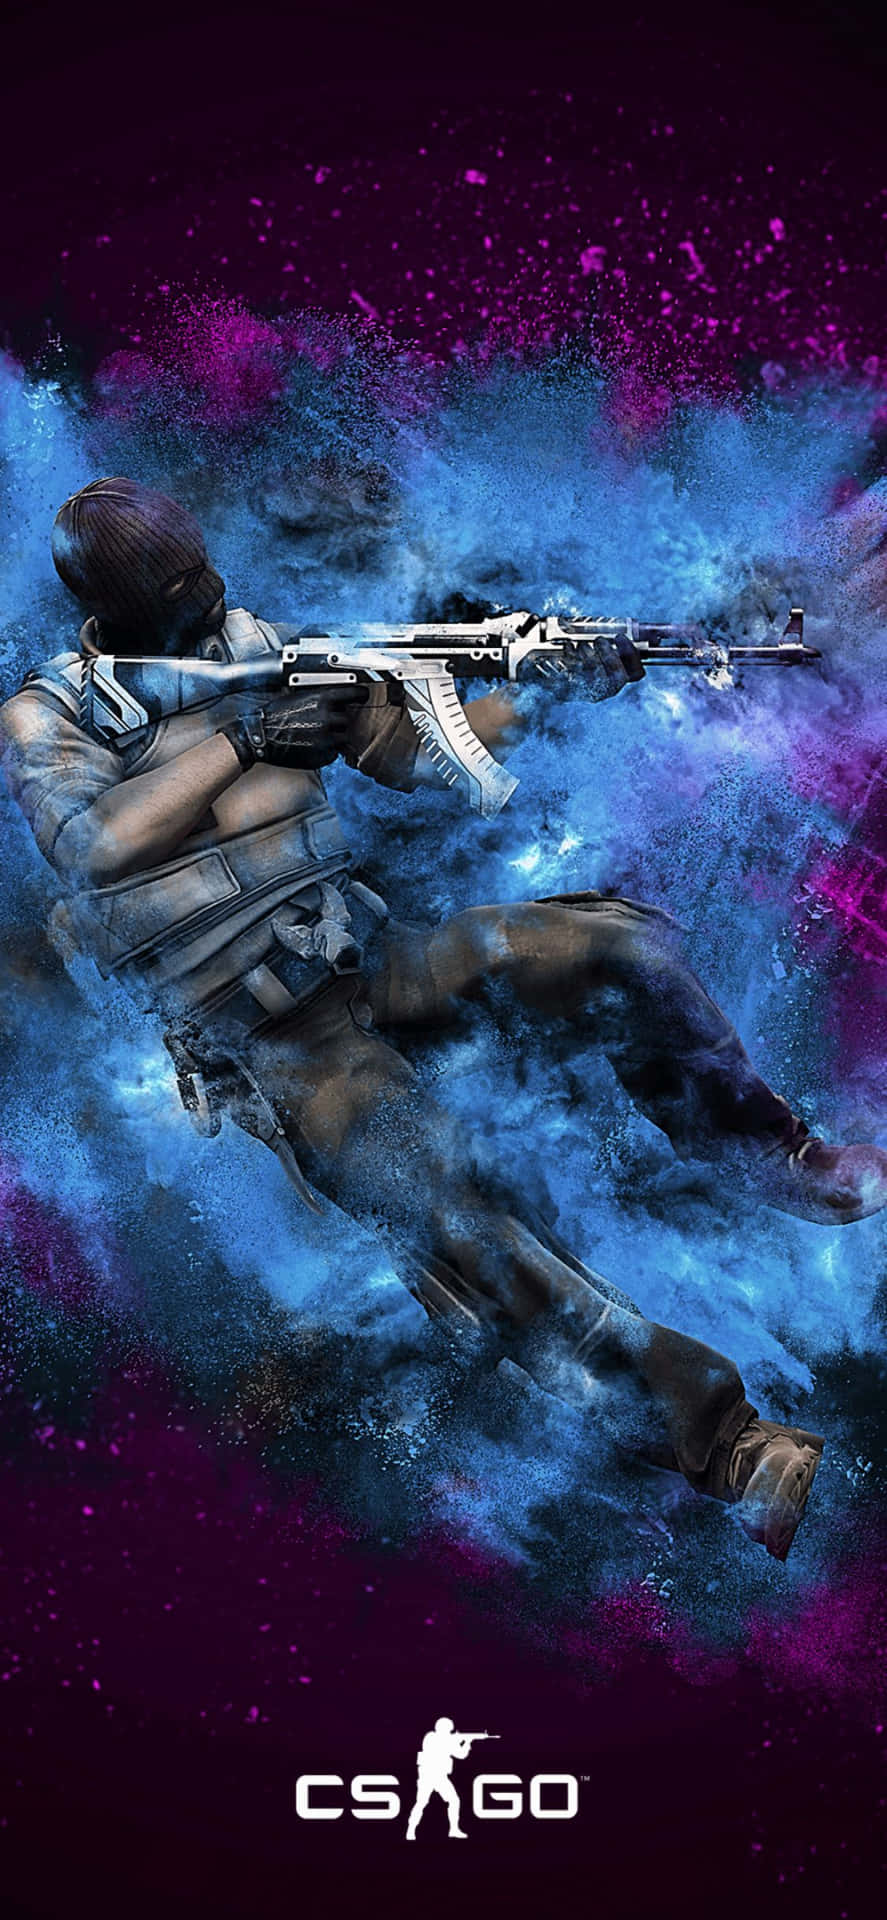 Iphone X Counter-strike Global Offensive Background Wallpaper